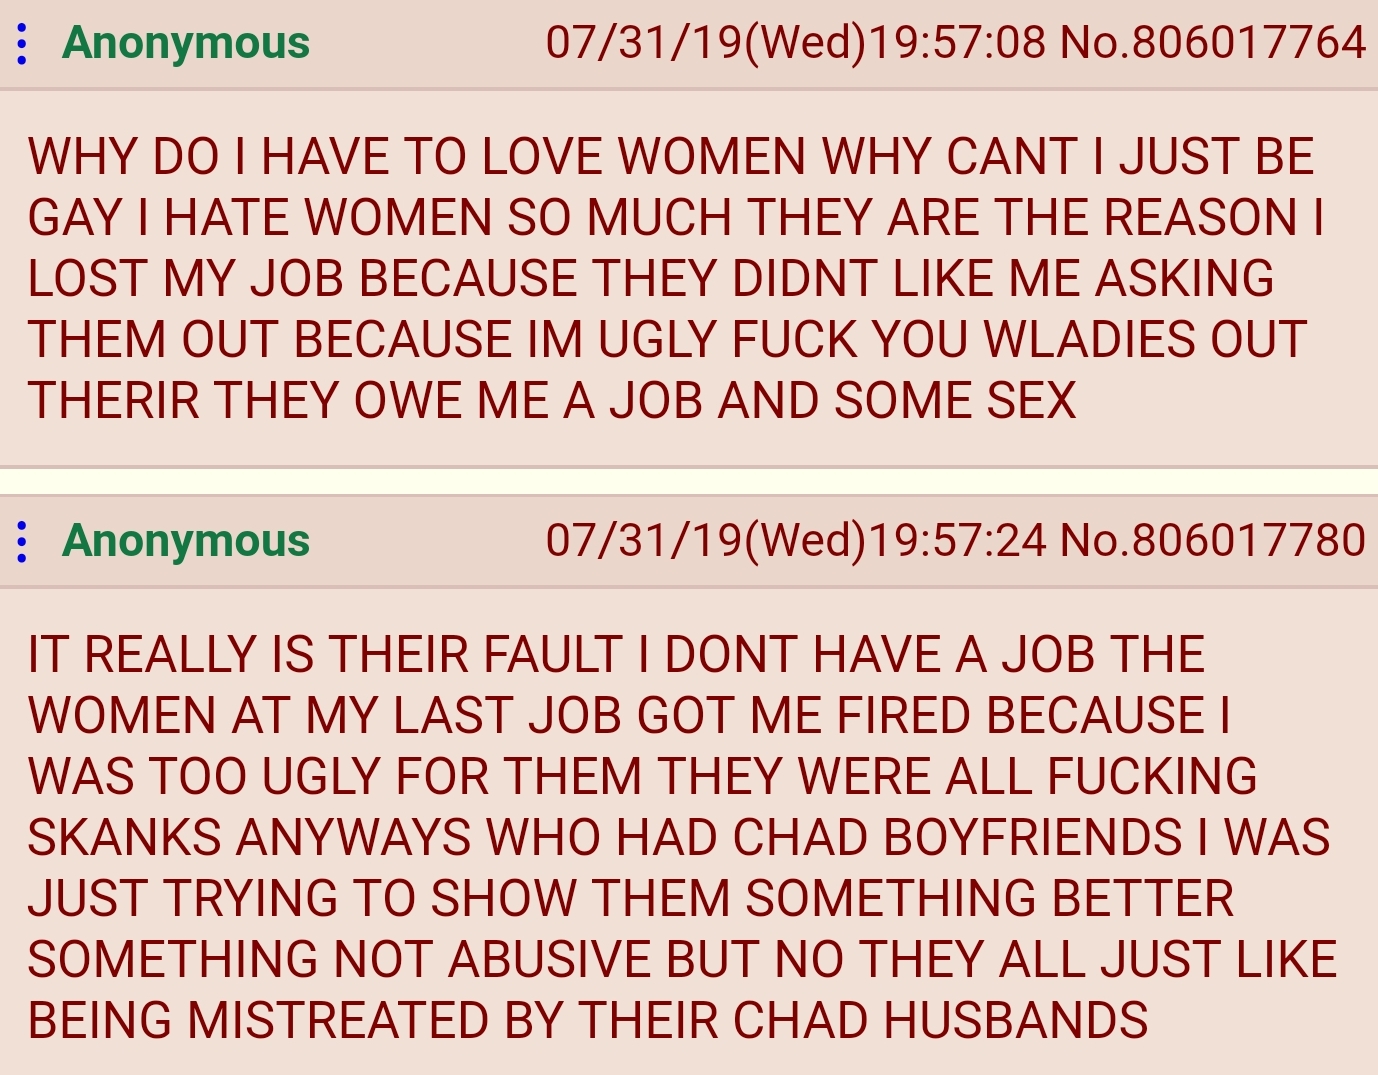 Anonymous 073119Wed08 No.806017764 Why Do I Have To Love Women Why Cant I Just Be Gay I Hate Women So Much They Are The Reason I Lost My Job Because They Didnt Me Asking Them Out Because Im Ugly Fuck You Wladies Out Therir They Owe Me A Job And Some Sex…